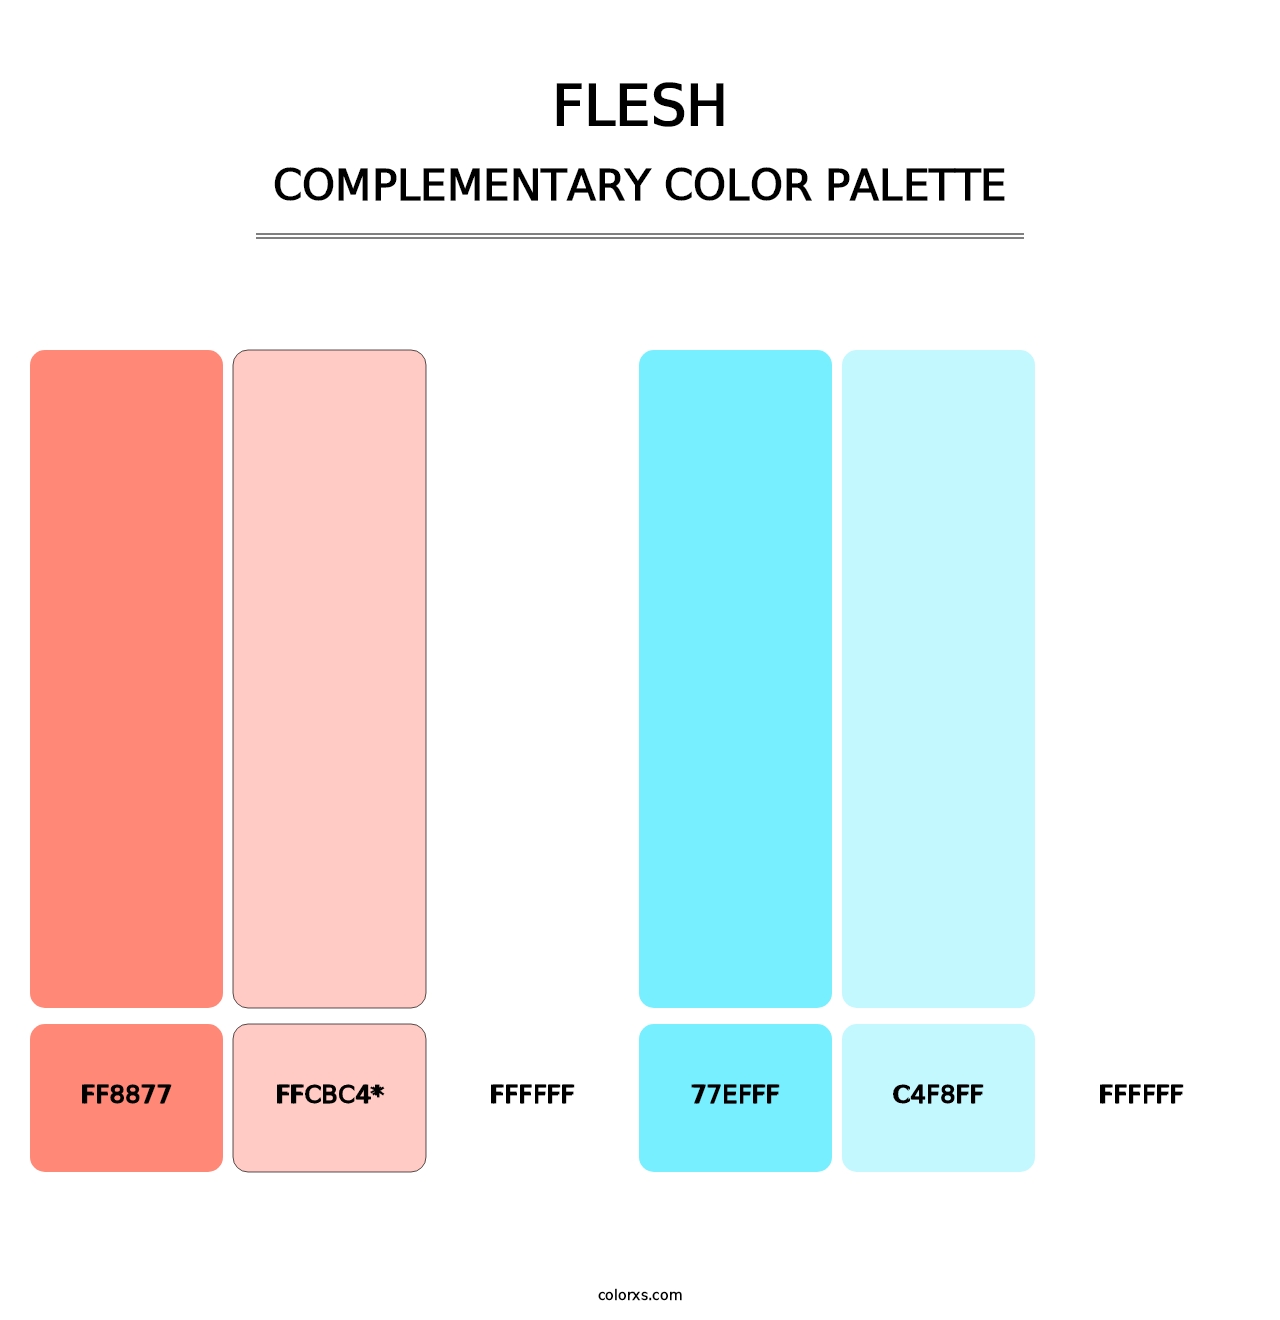 Flesh - Complementary Color Palette